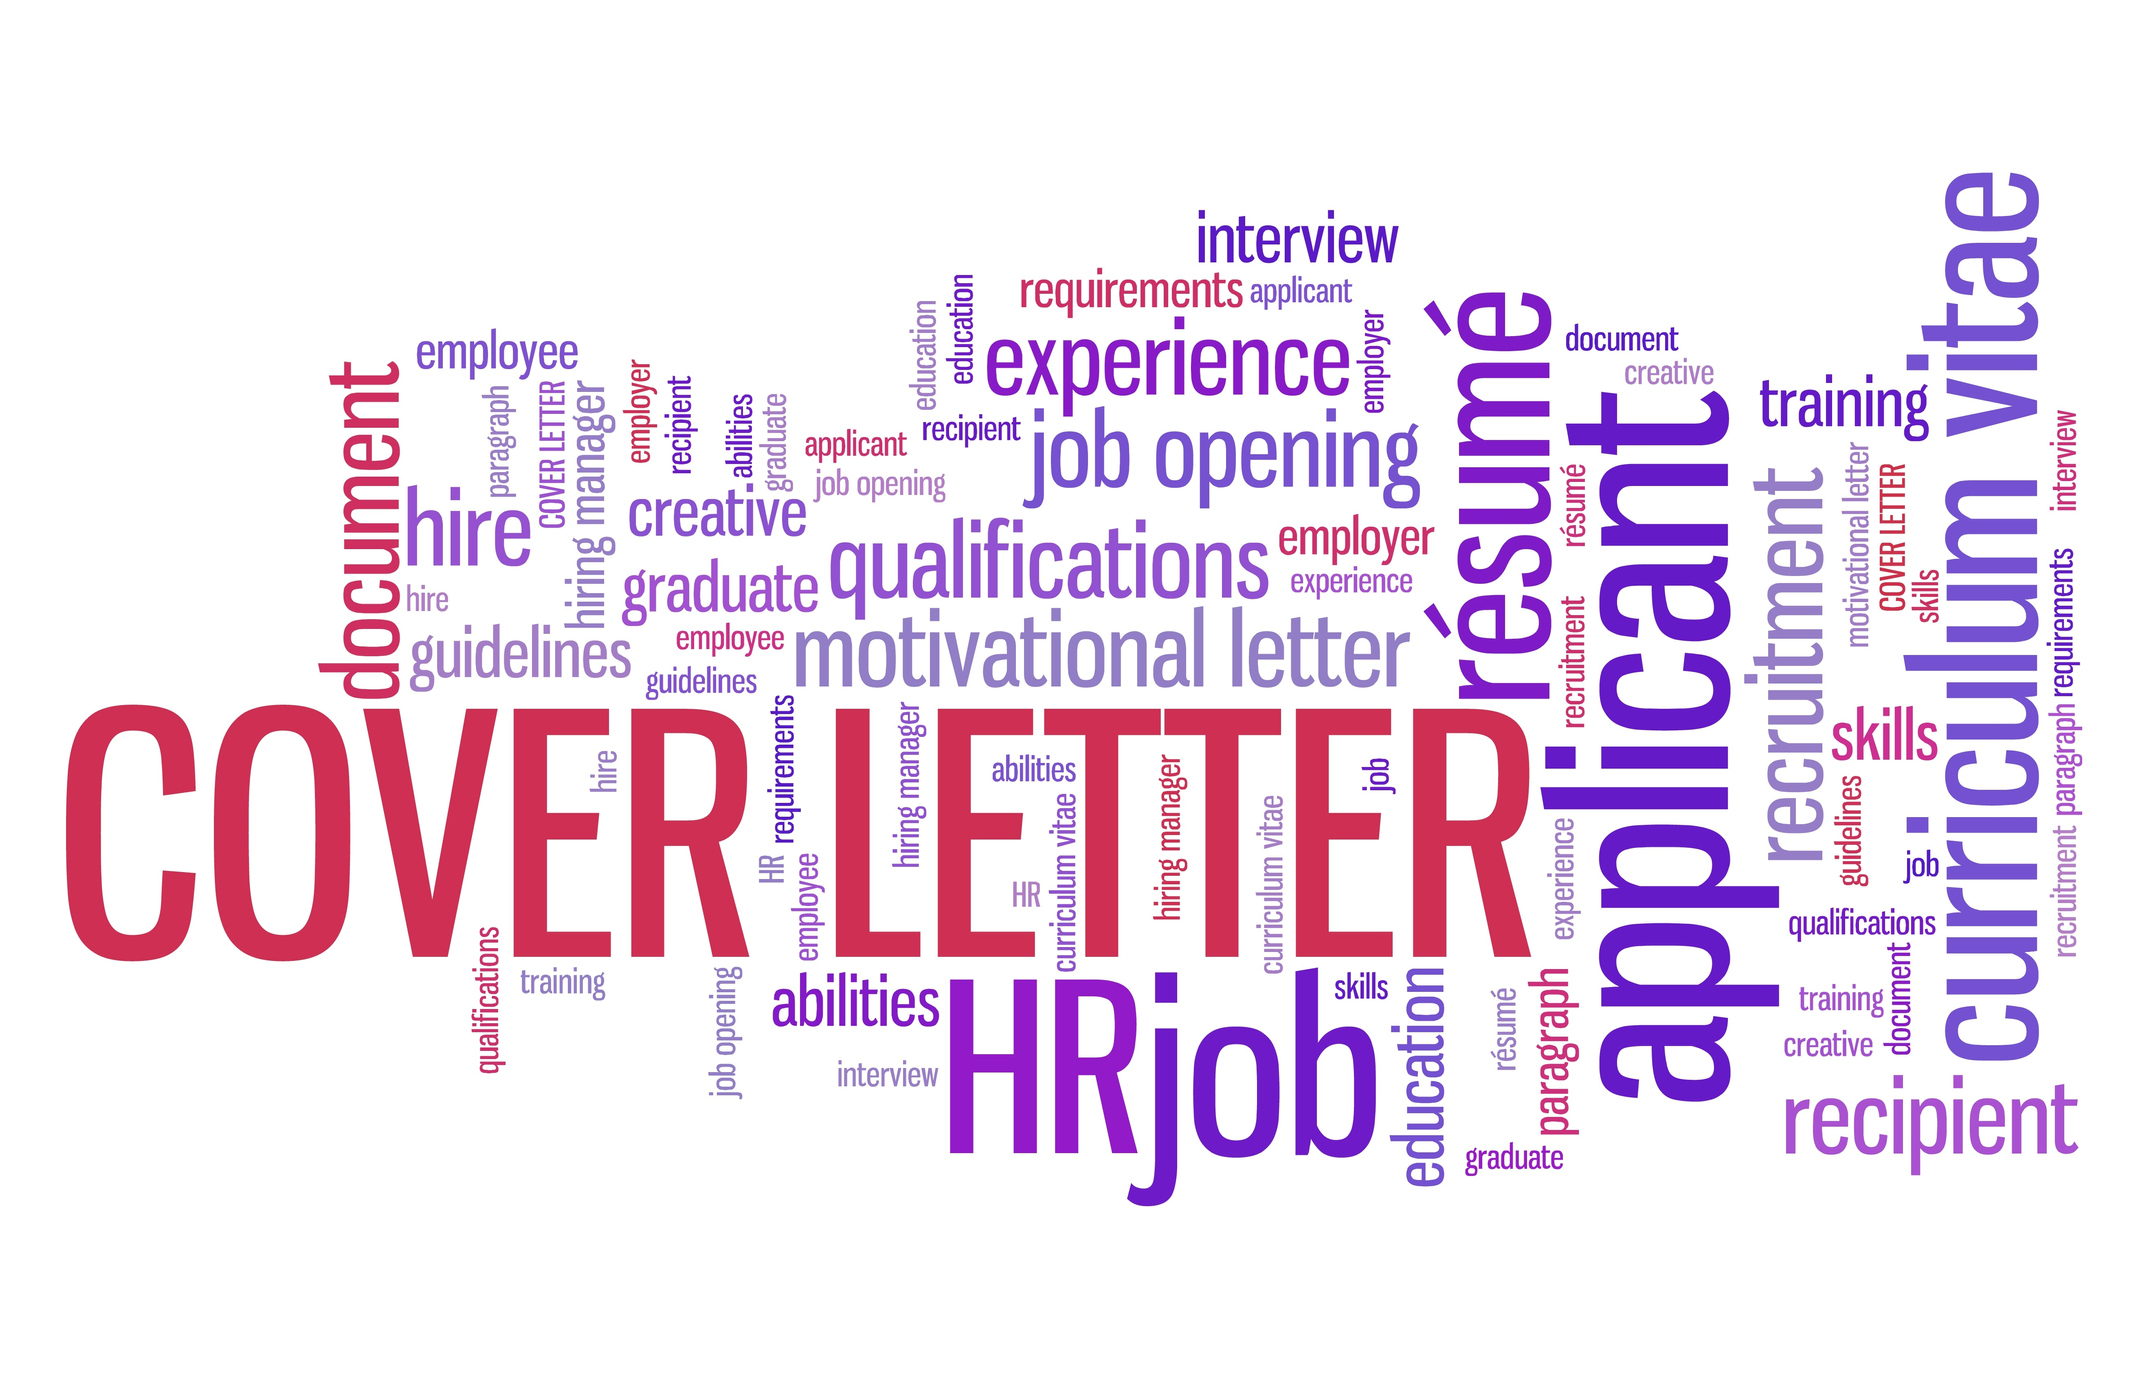 Cover Letter with Impact